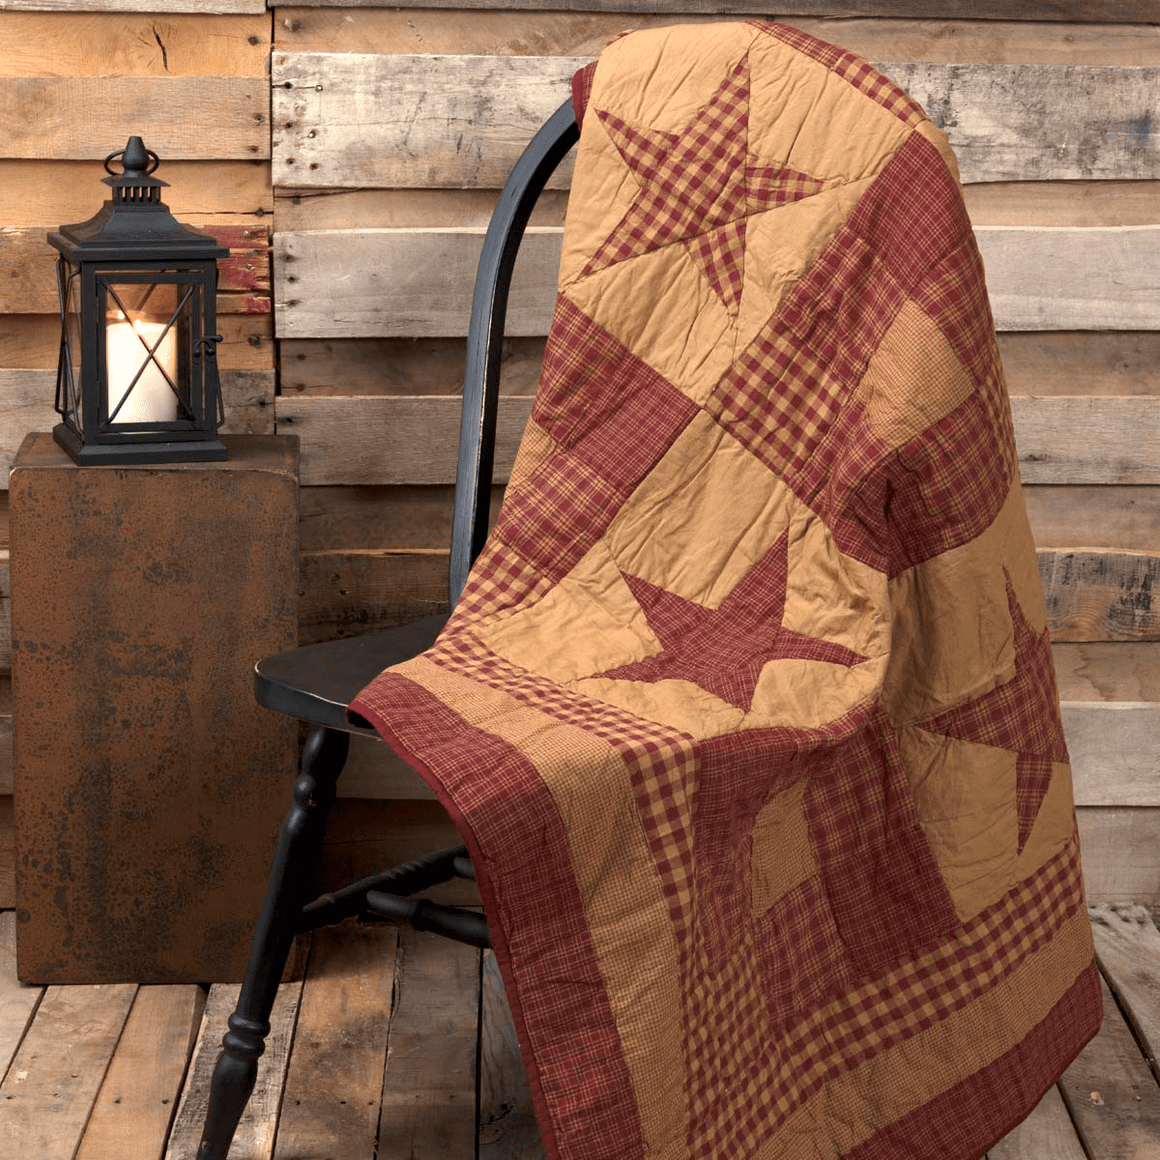 Ninepatch Star Quilted Throw / Wallhanging